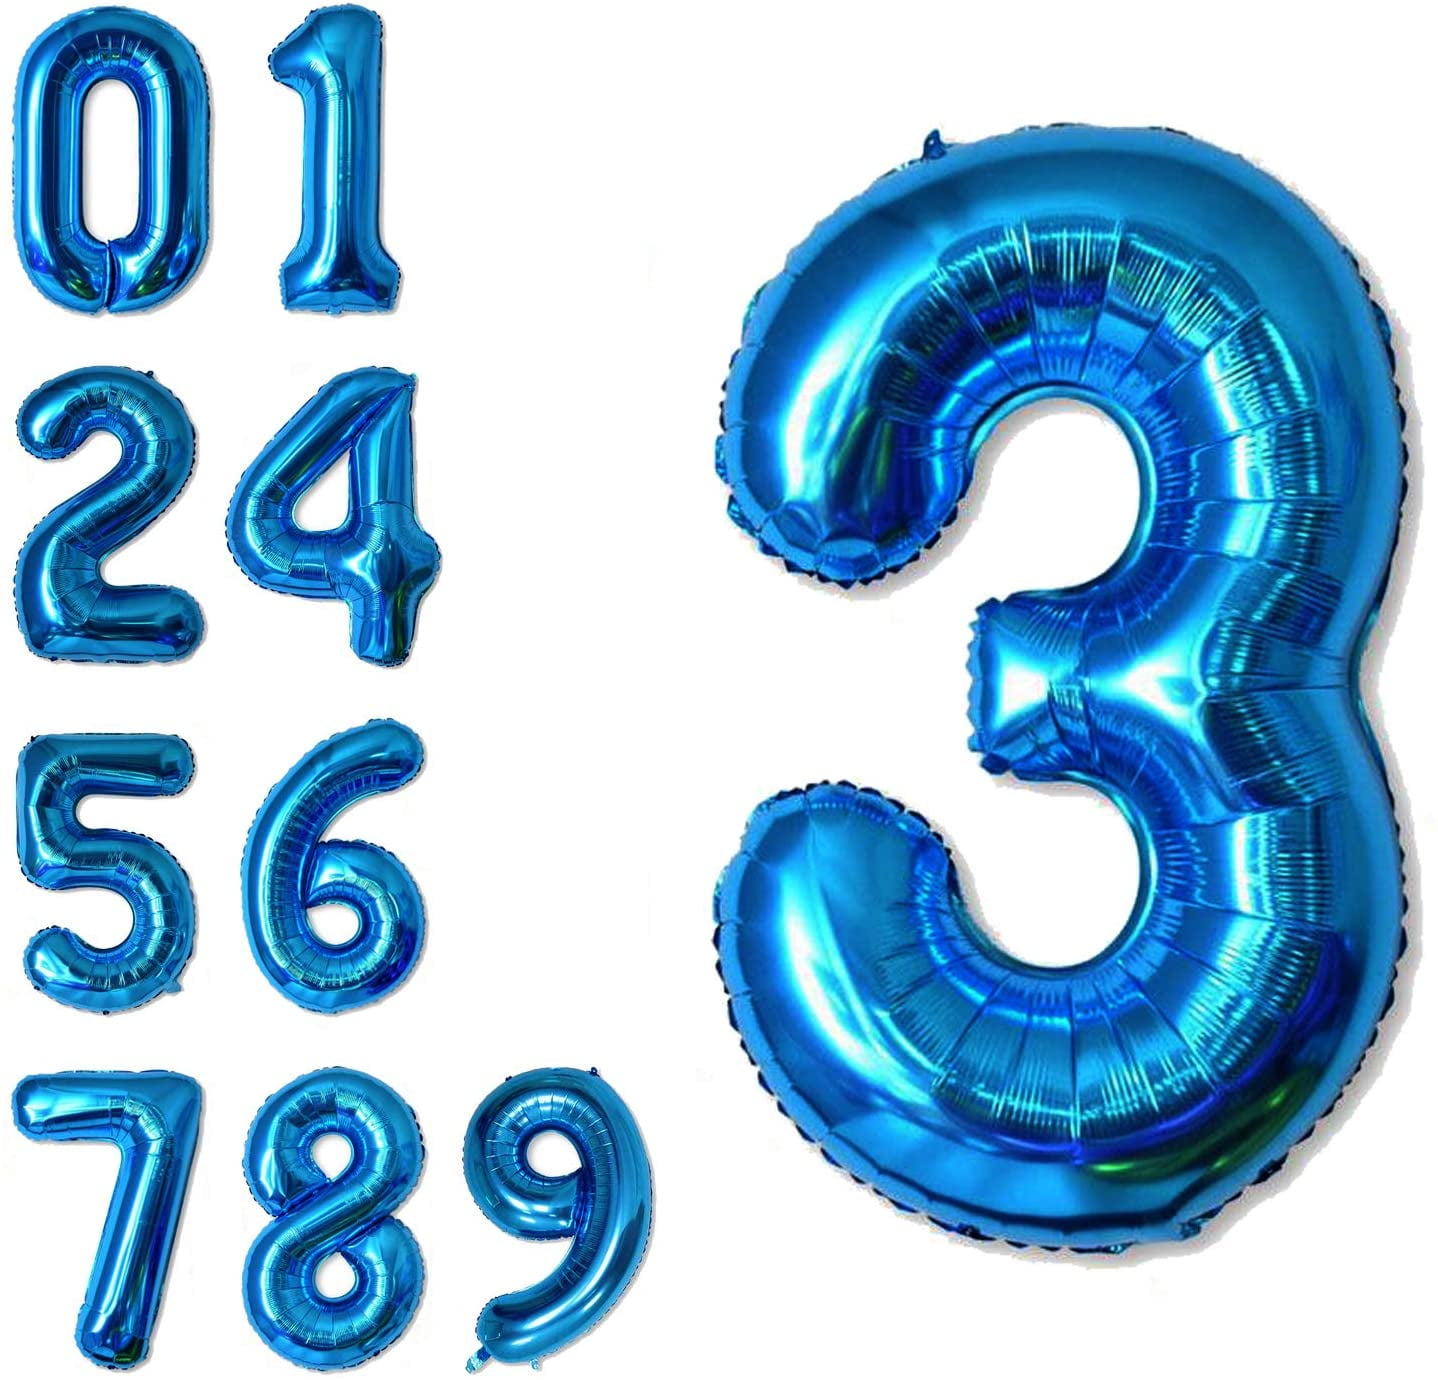 Number Balloons for Birthday Party Anniversary Decoration 40 inch Balloon Gold Number 40 Balloon Birthday Balloons Jumbo Balloon Number Helium Foil Digital Balloon